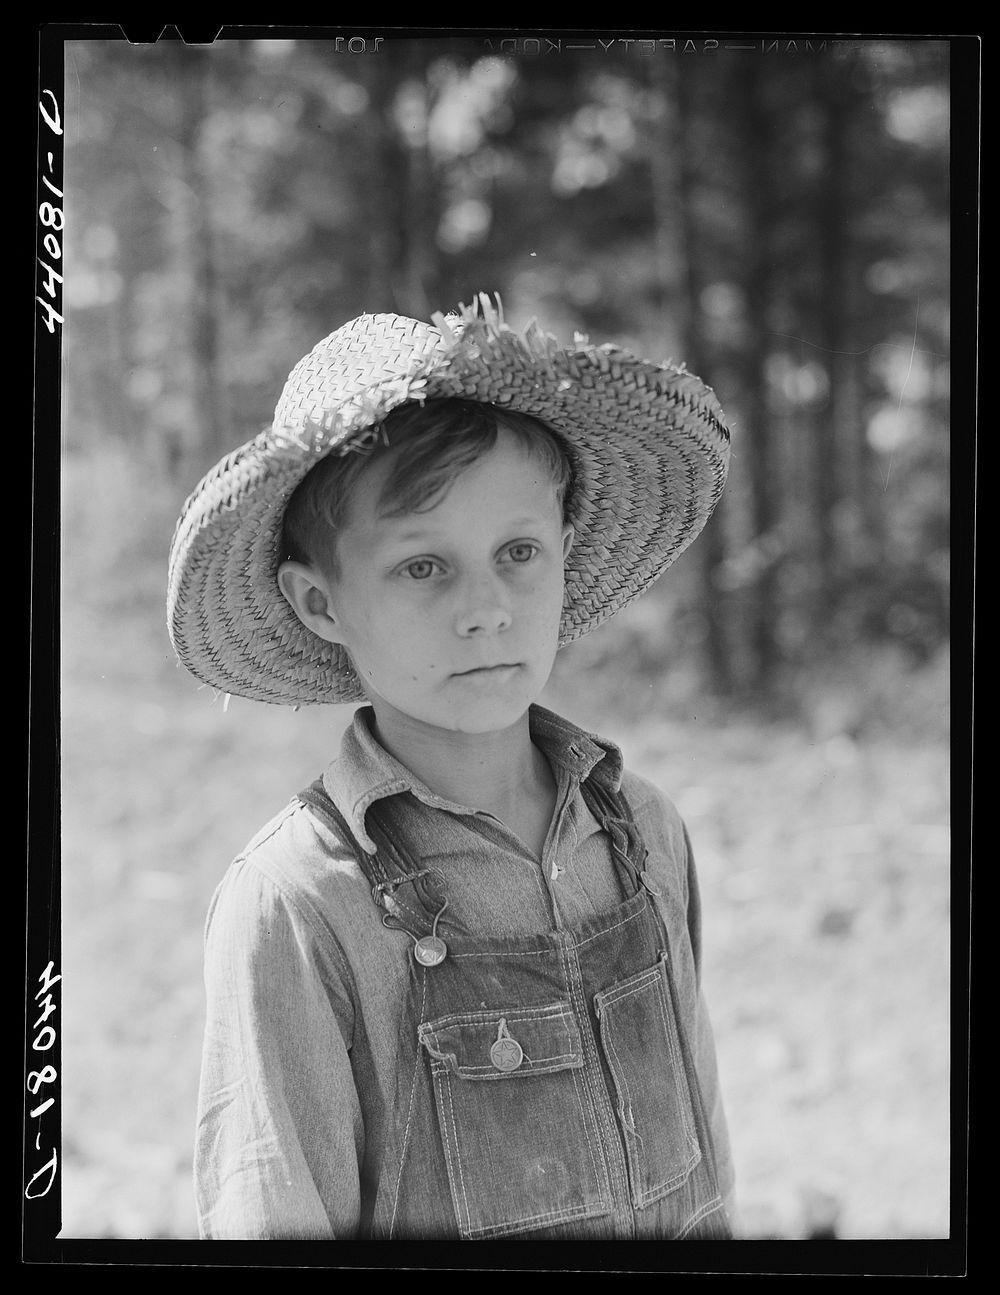 Colie Smith, son of FSA (Farm Security Administration) borrower Lemuel Smith. Carroll County, Georgia. Sourced from the…